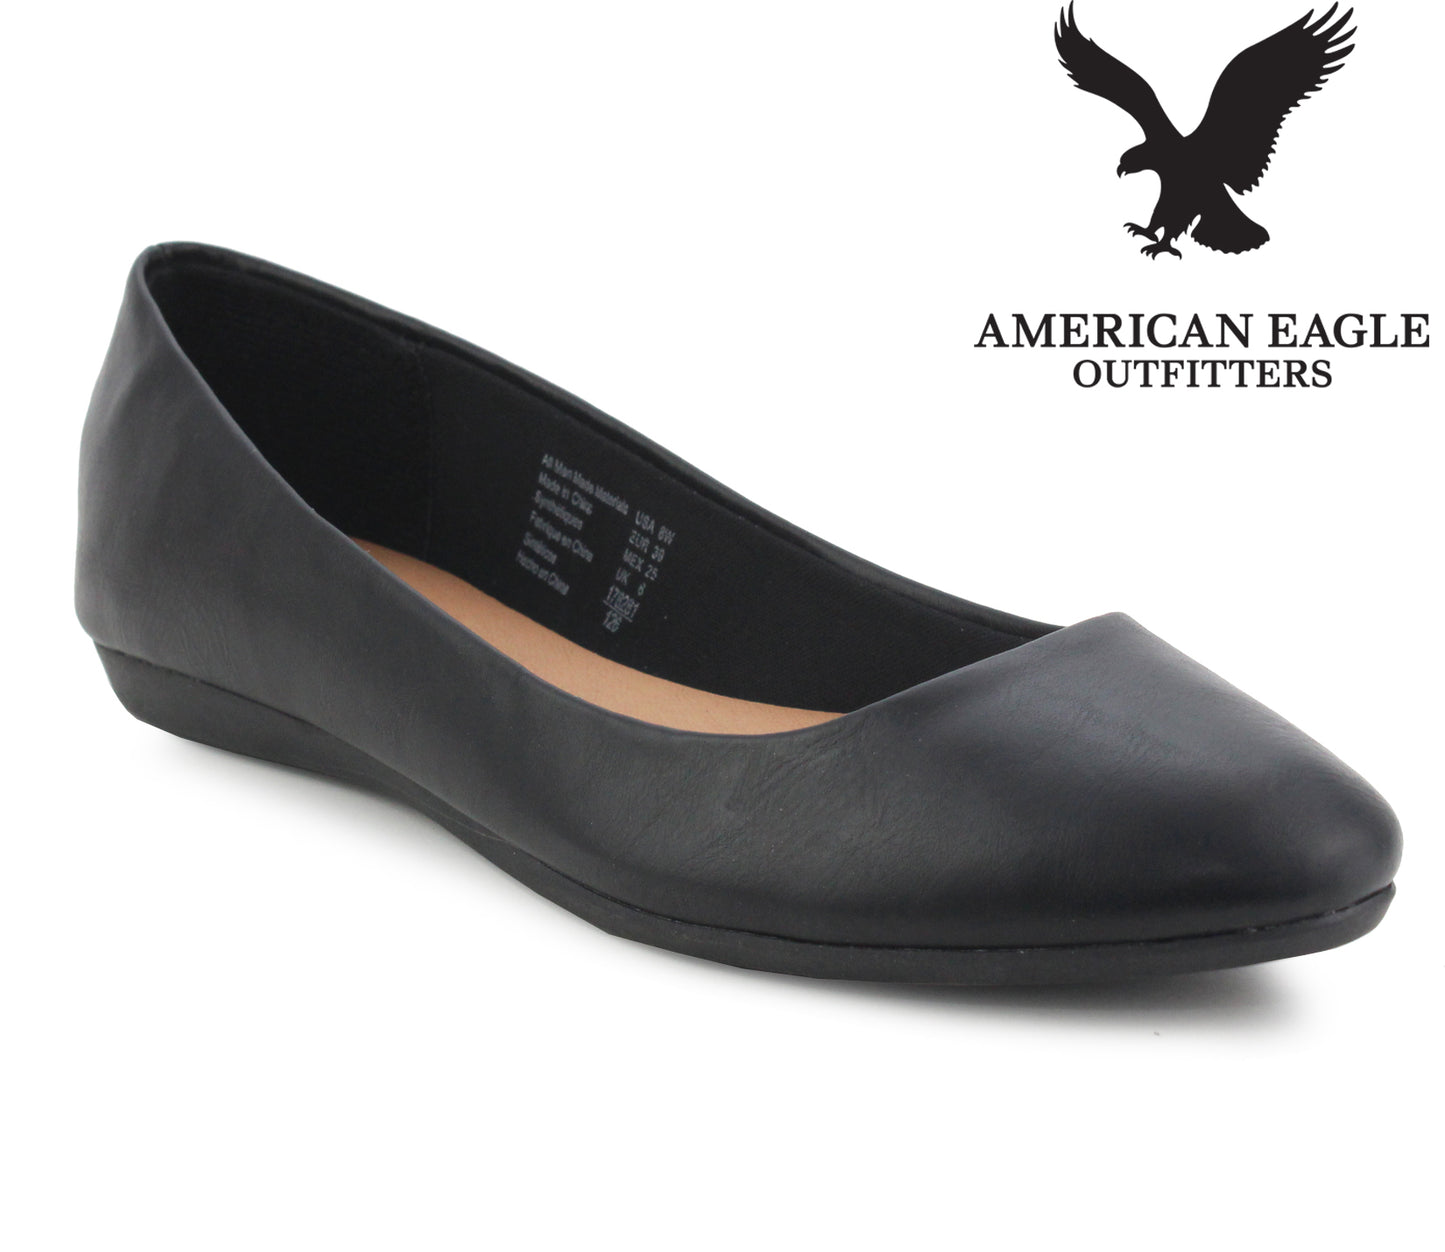 American Eagle Outfitters Women's Black Pumps